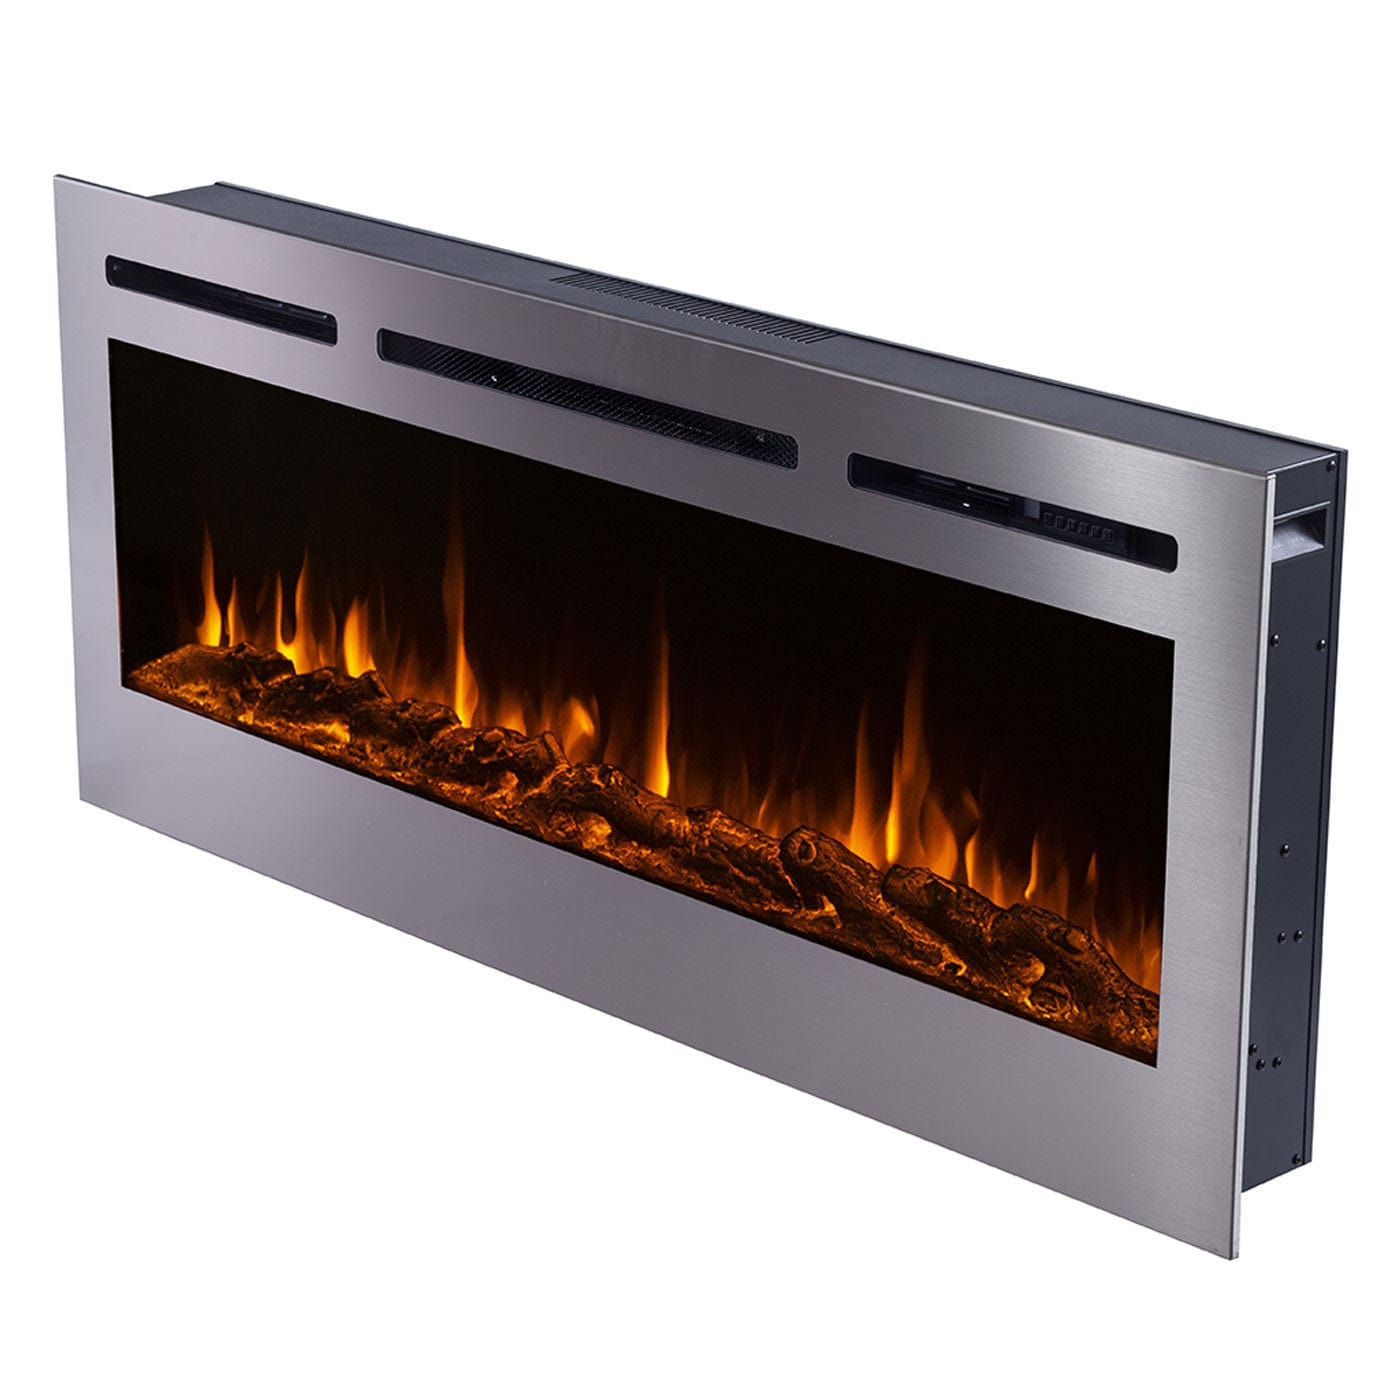 	Touchstone Sideline Deluxe Electric Fireplace Stainless 50 inch shown on an angle. 